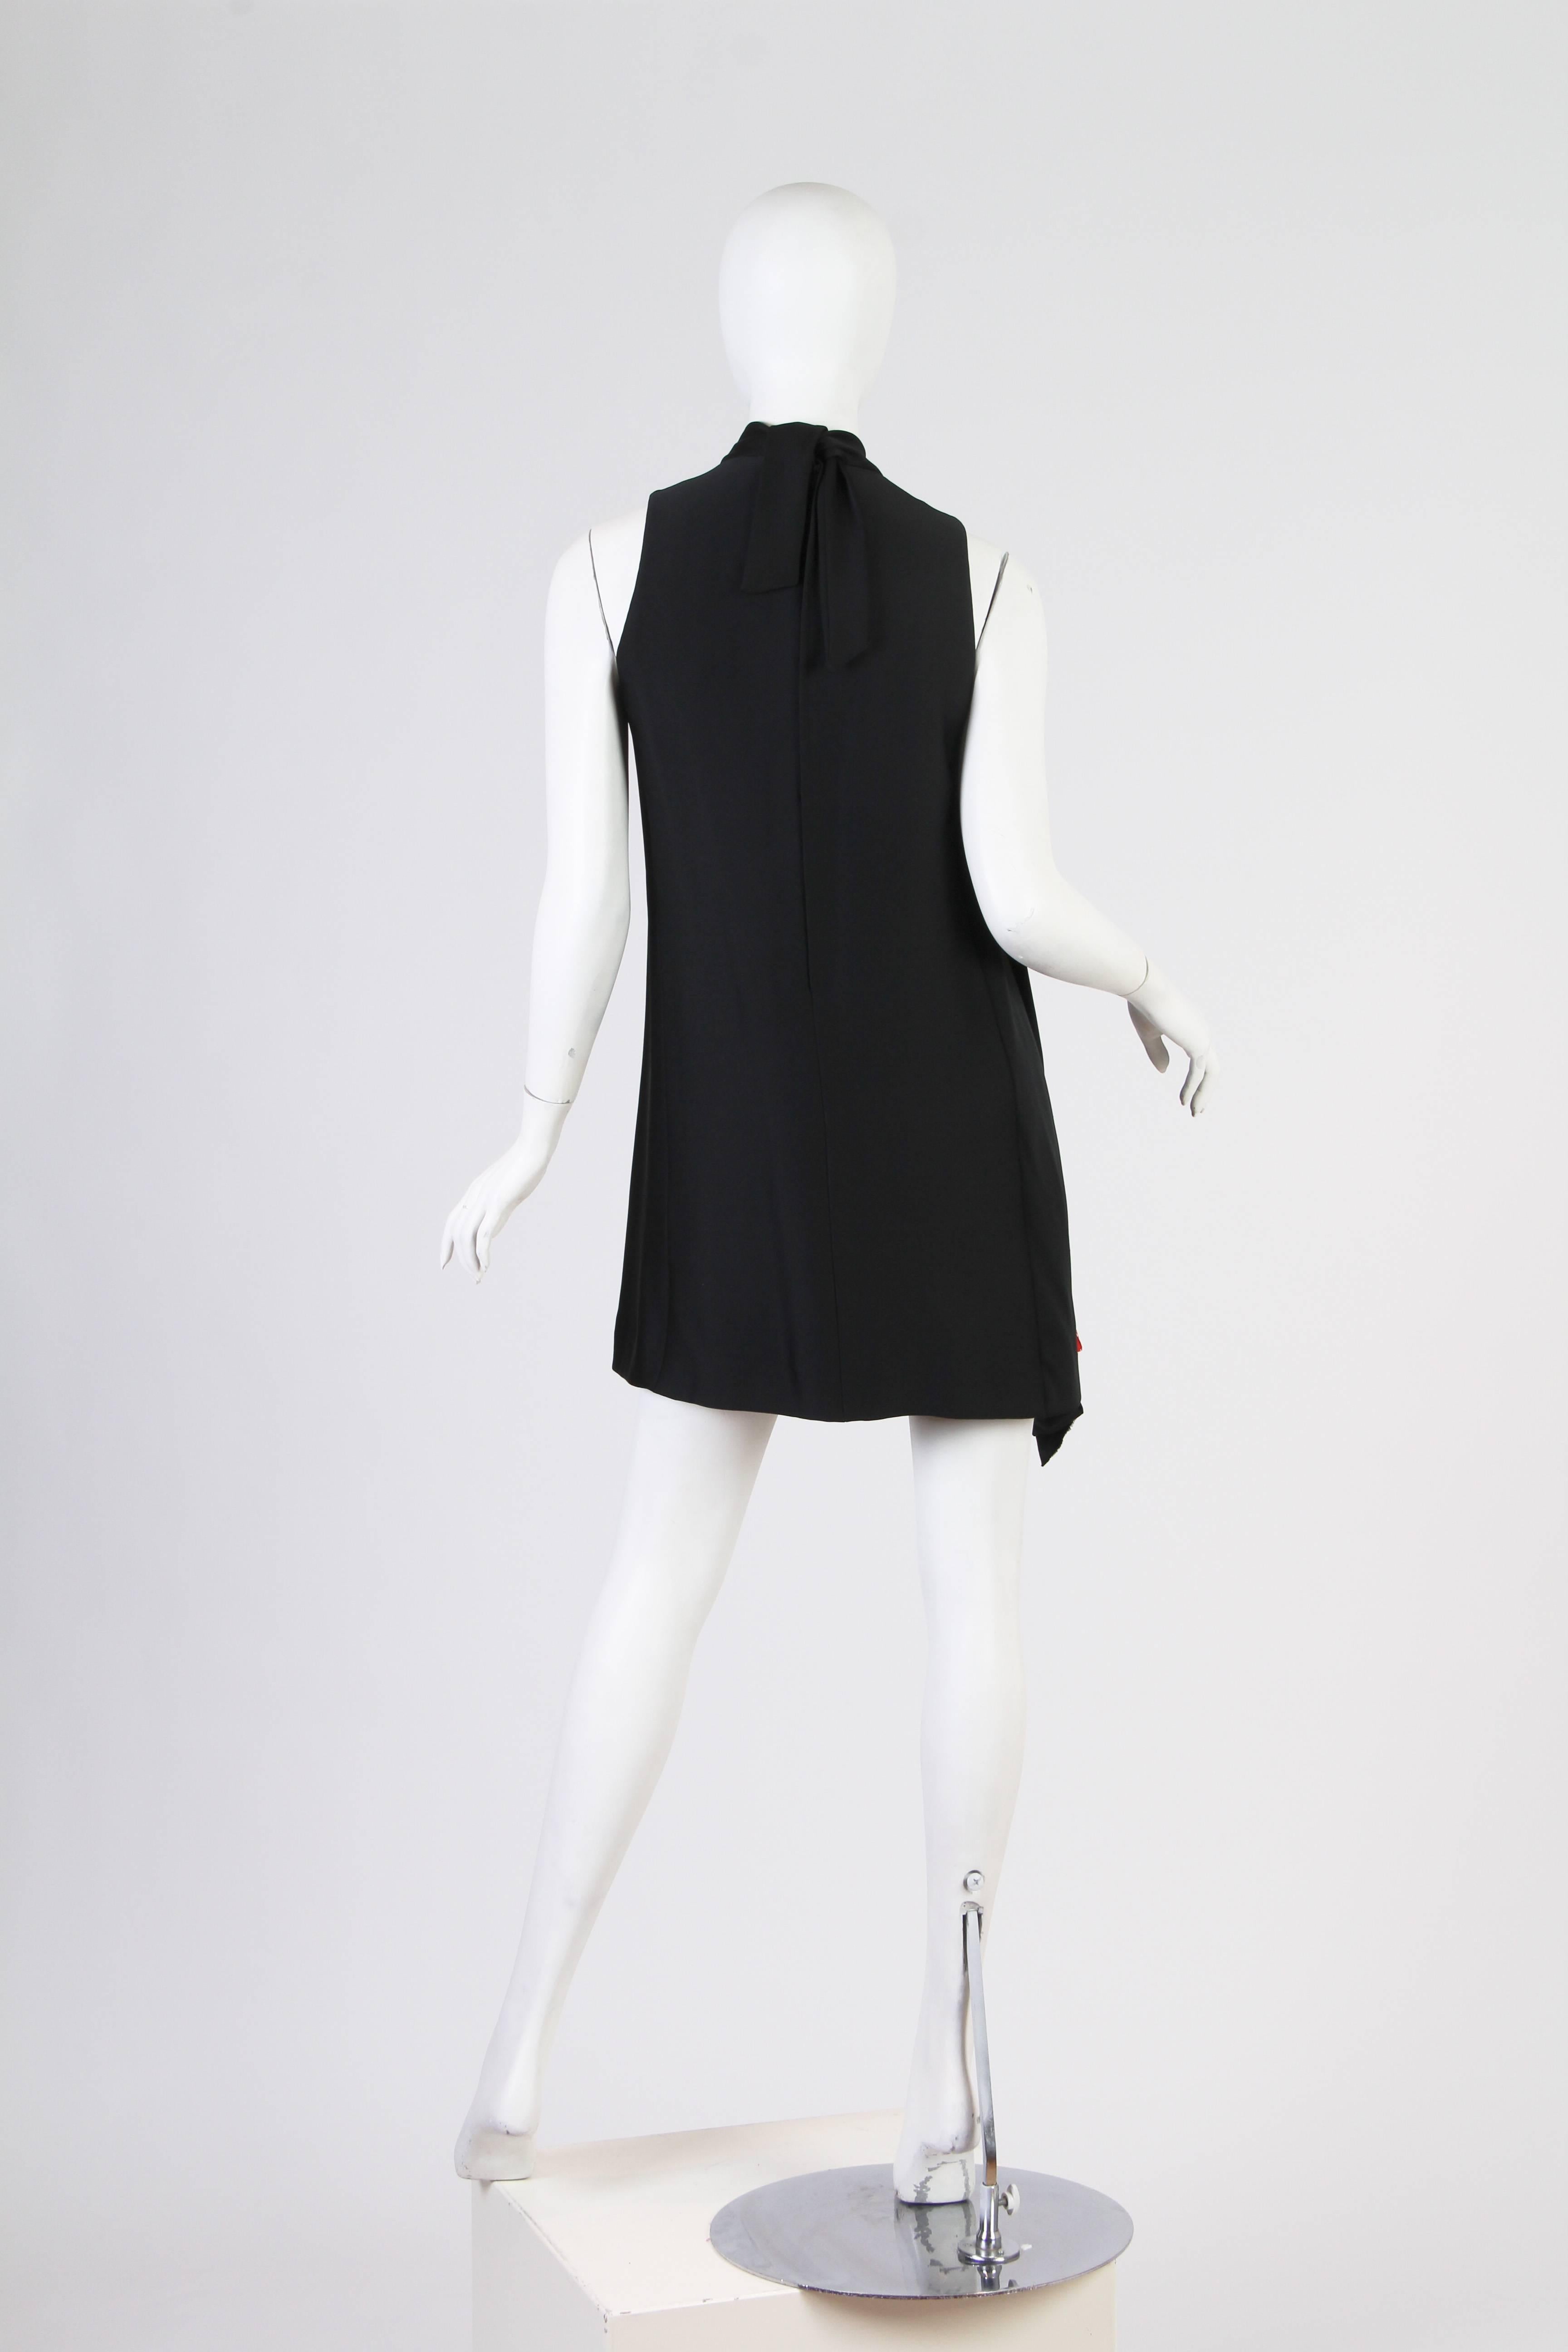 1960s Asymmetrically Draped Mod Couture Dress from Pierre Cardin 1